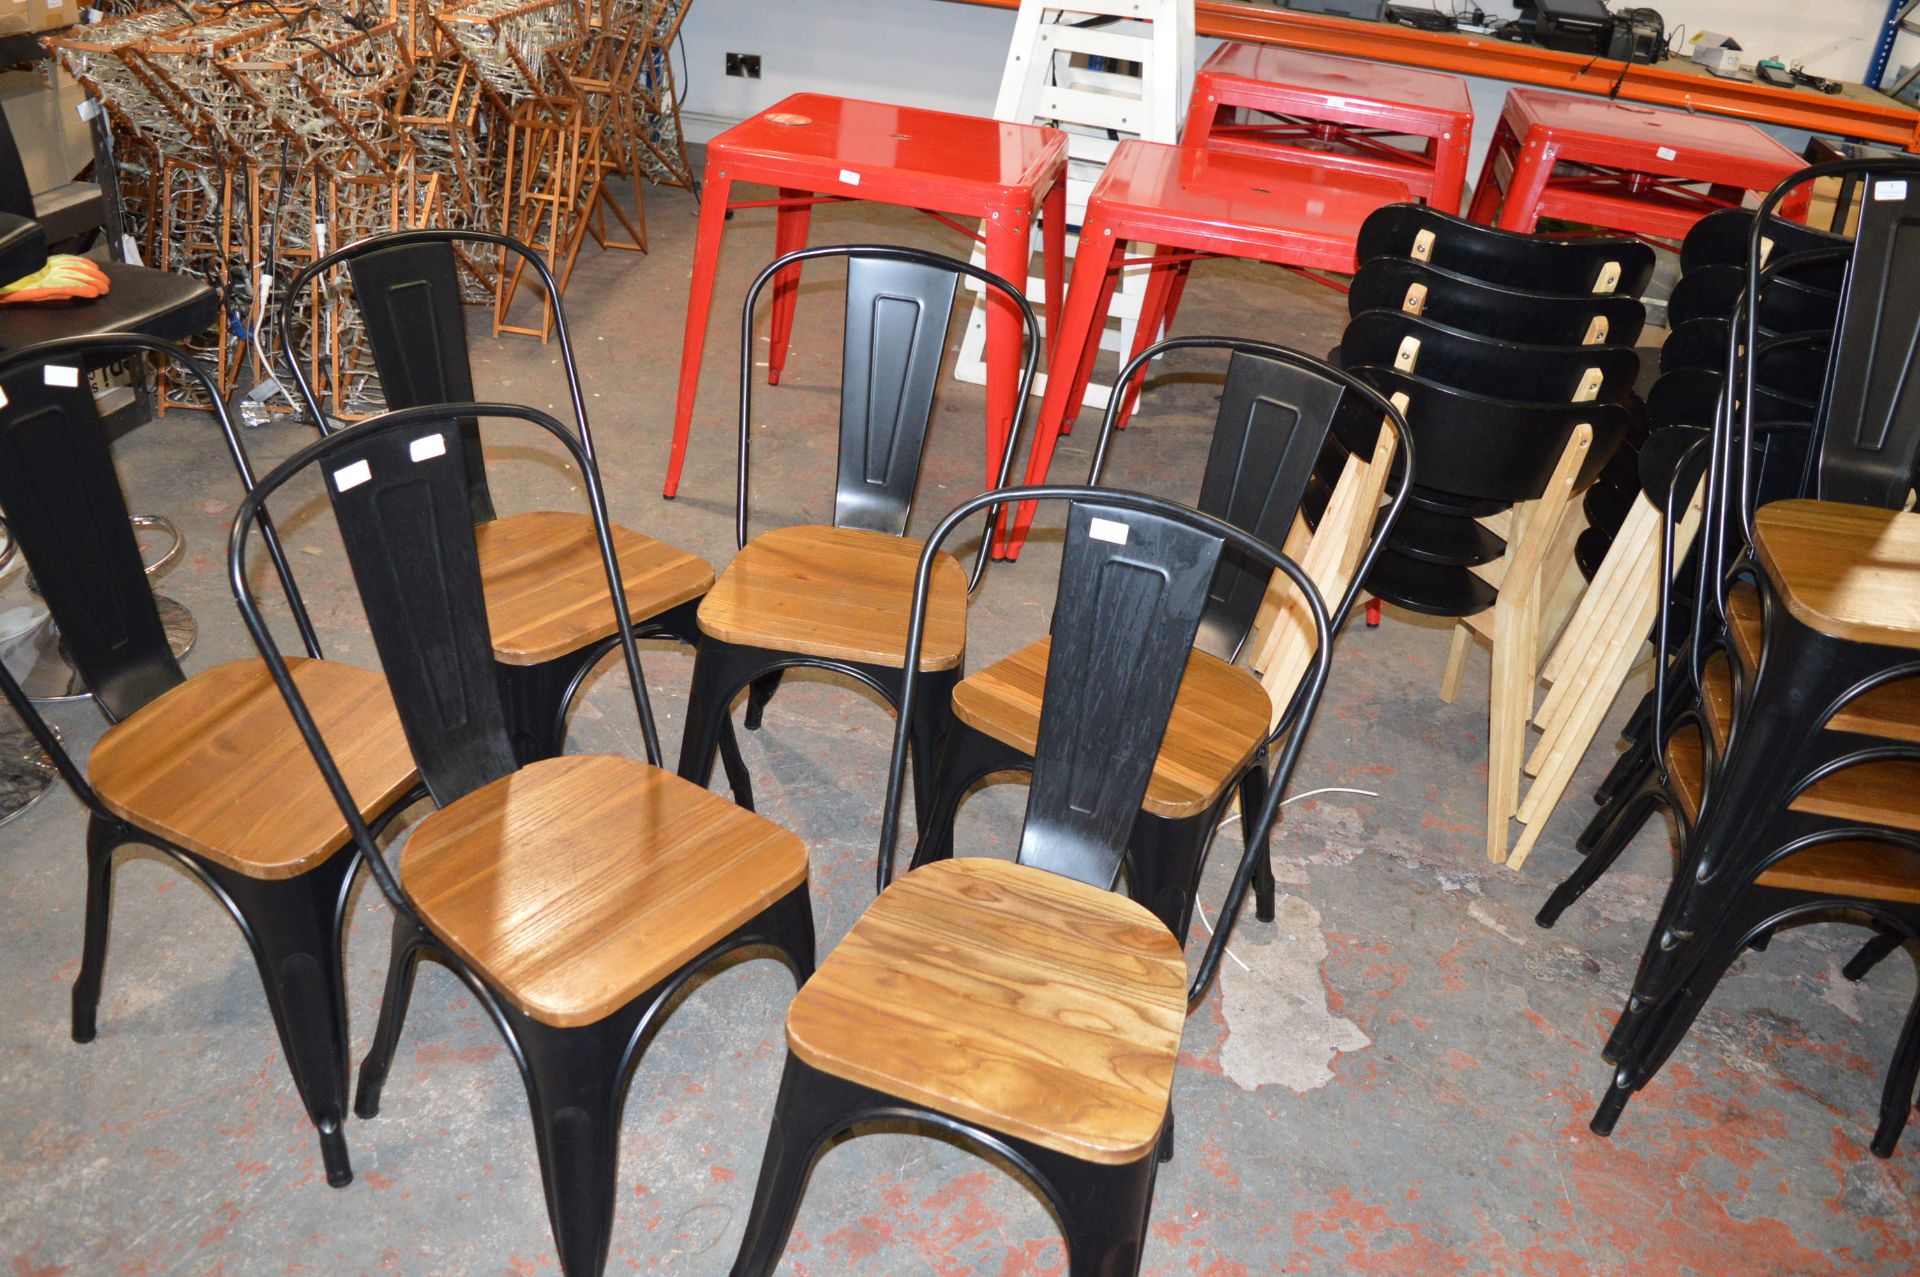 *Six Black Metal Chairs with Wooden Seats